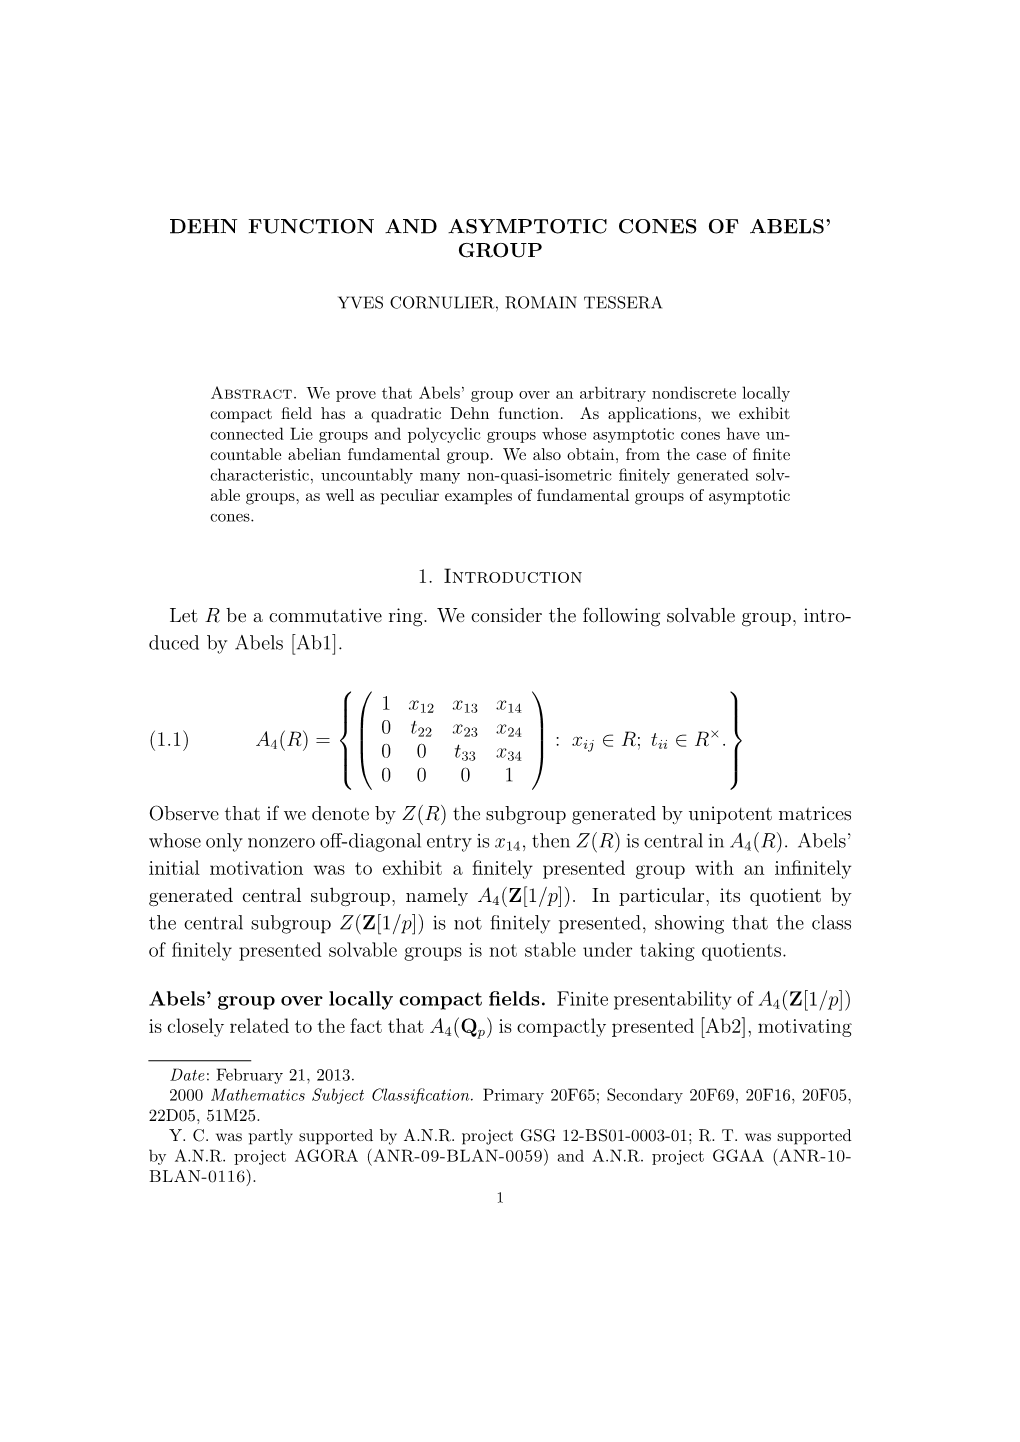 Dehn Function and Asymptotic Cones of Abels' Group 1